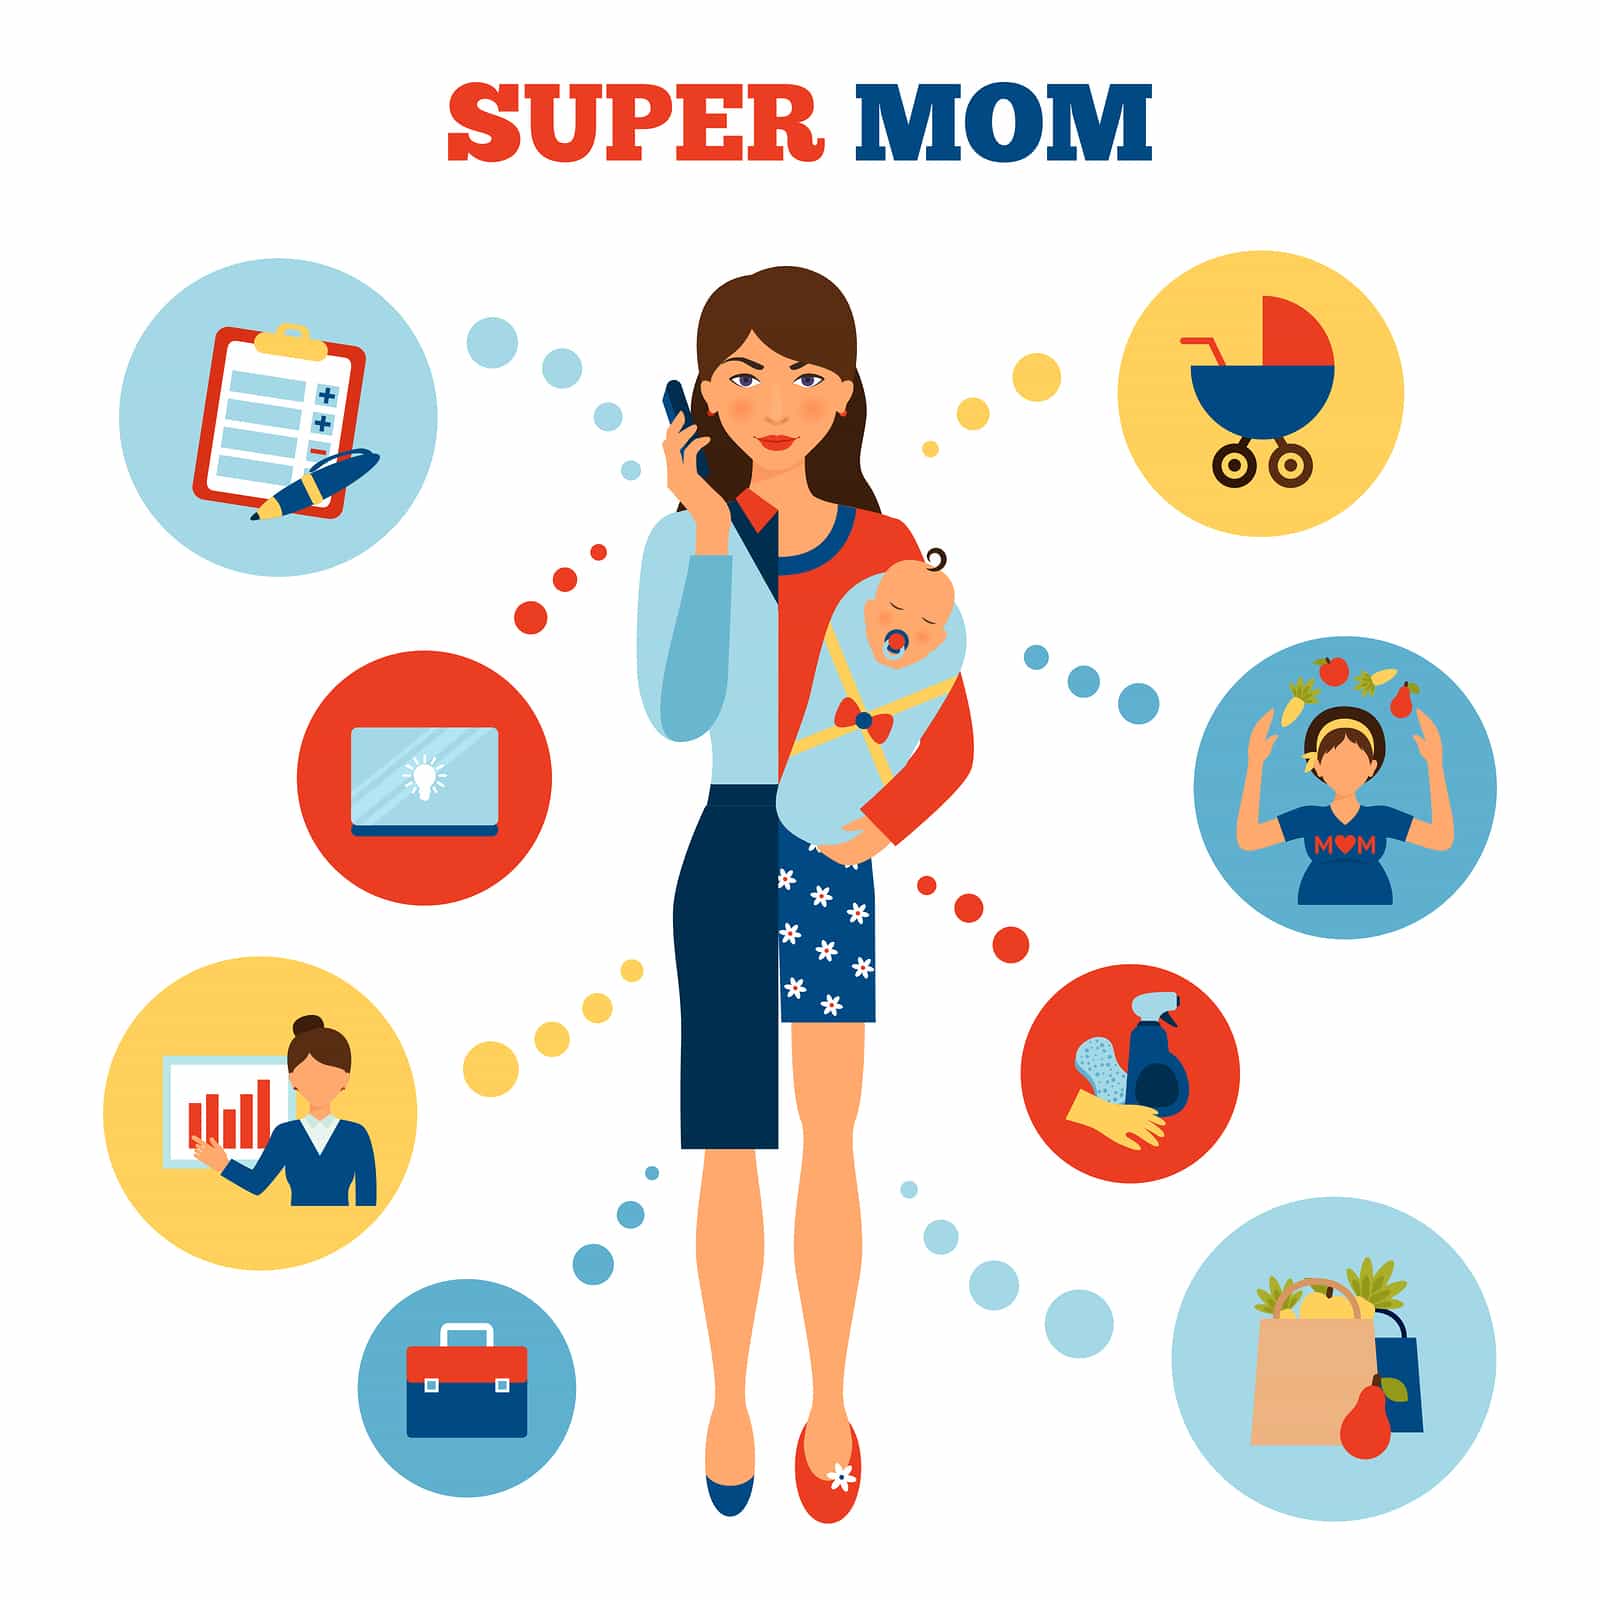 SUPER MOM, ARE YOU COMPROMISING YOUR HEALTH? - Sisters in Health